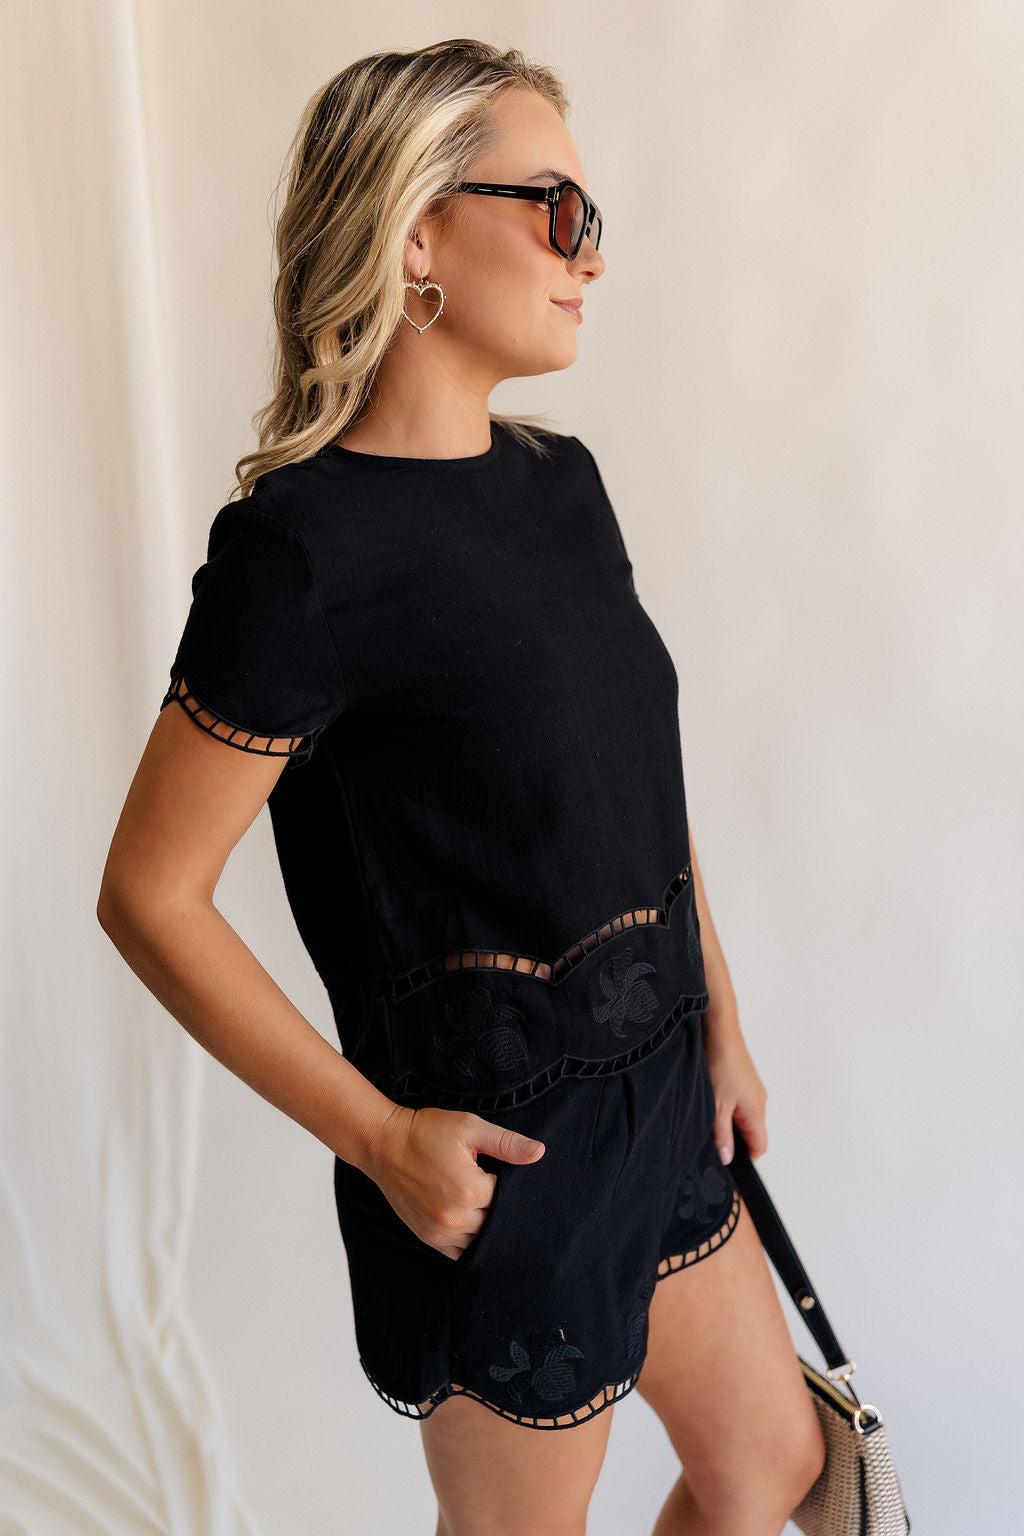 Side view of female model wearing the Stella Black Floral Trim Shorts which features Black Knit Fabric, Scalloped Hem with Open Details, Monochrome Floral Print, Front Zipper with Button Closure, Two Front Pockets and Belt Loops